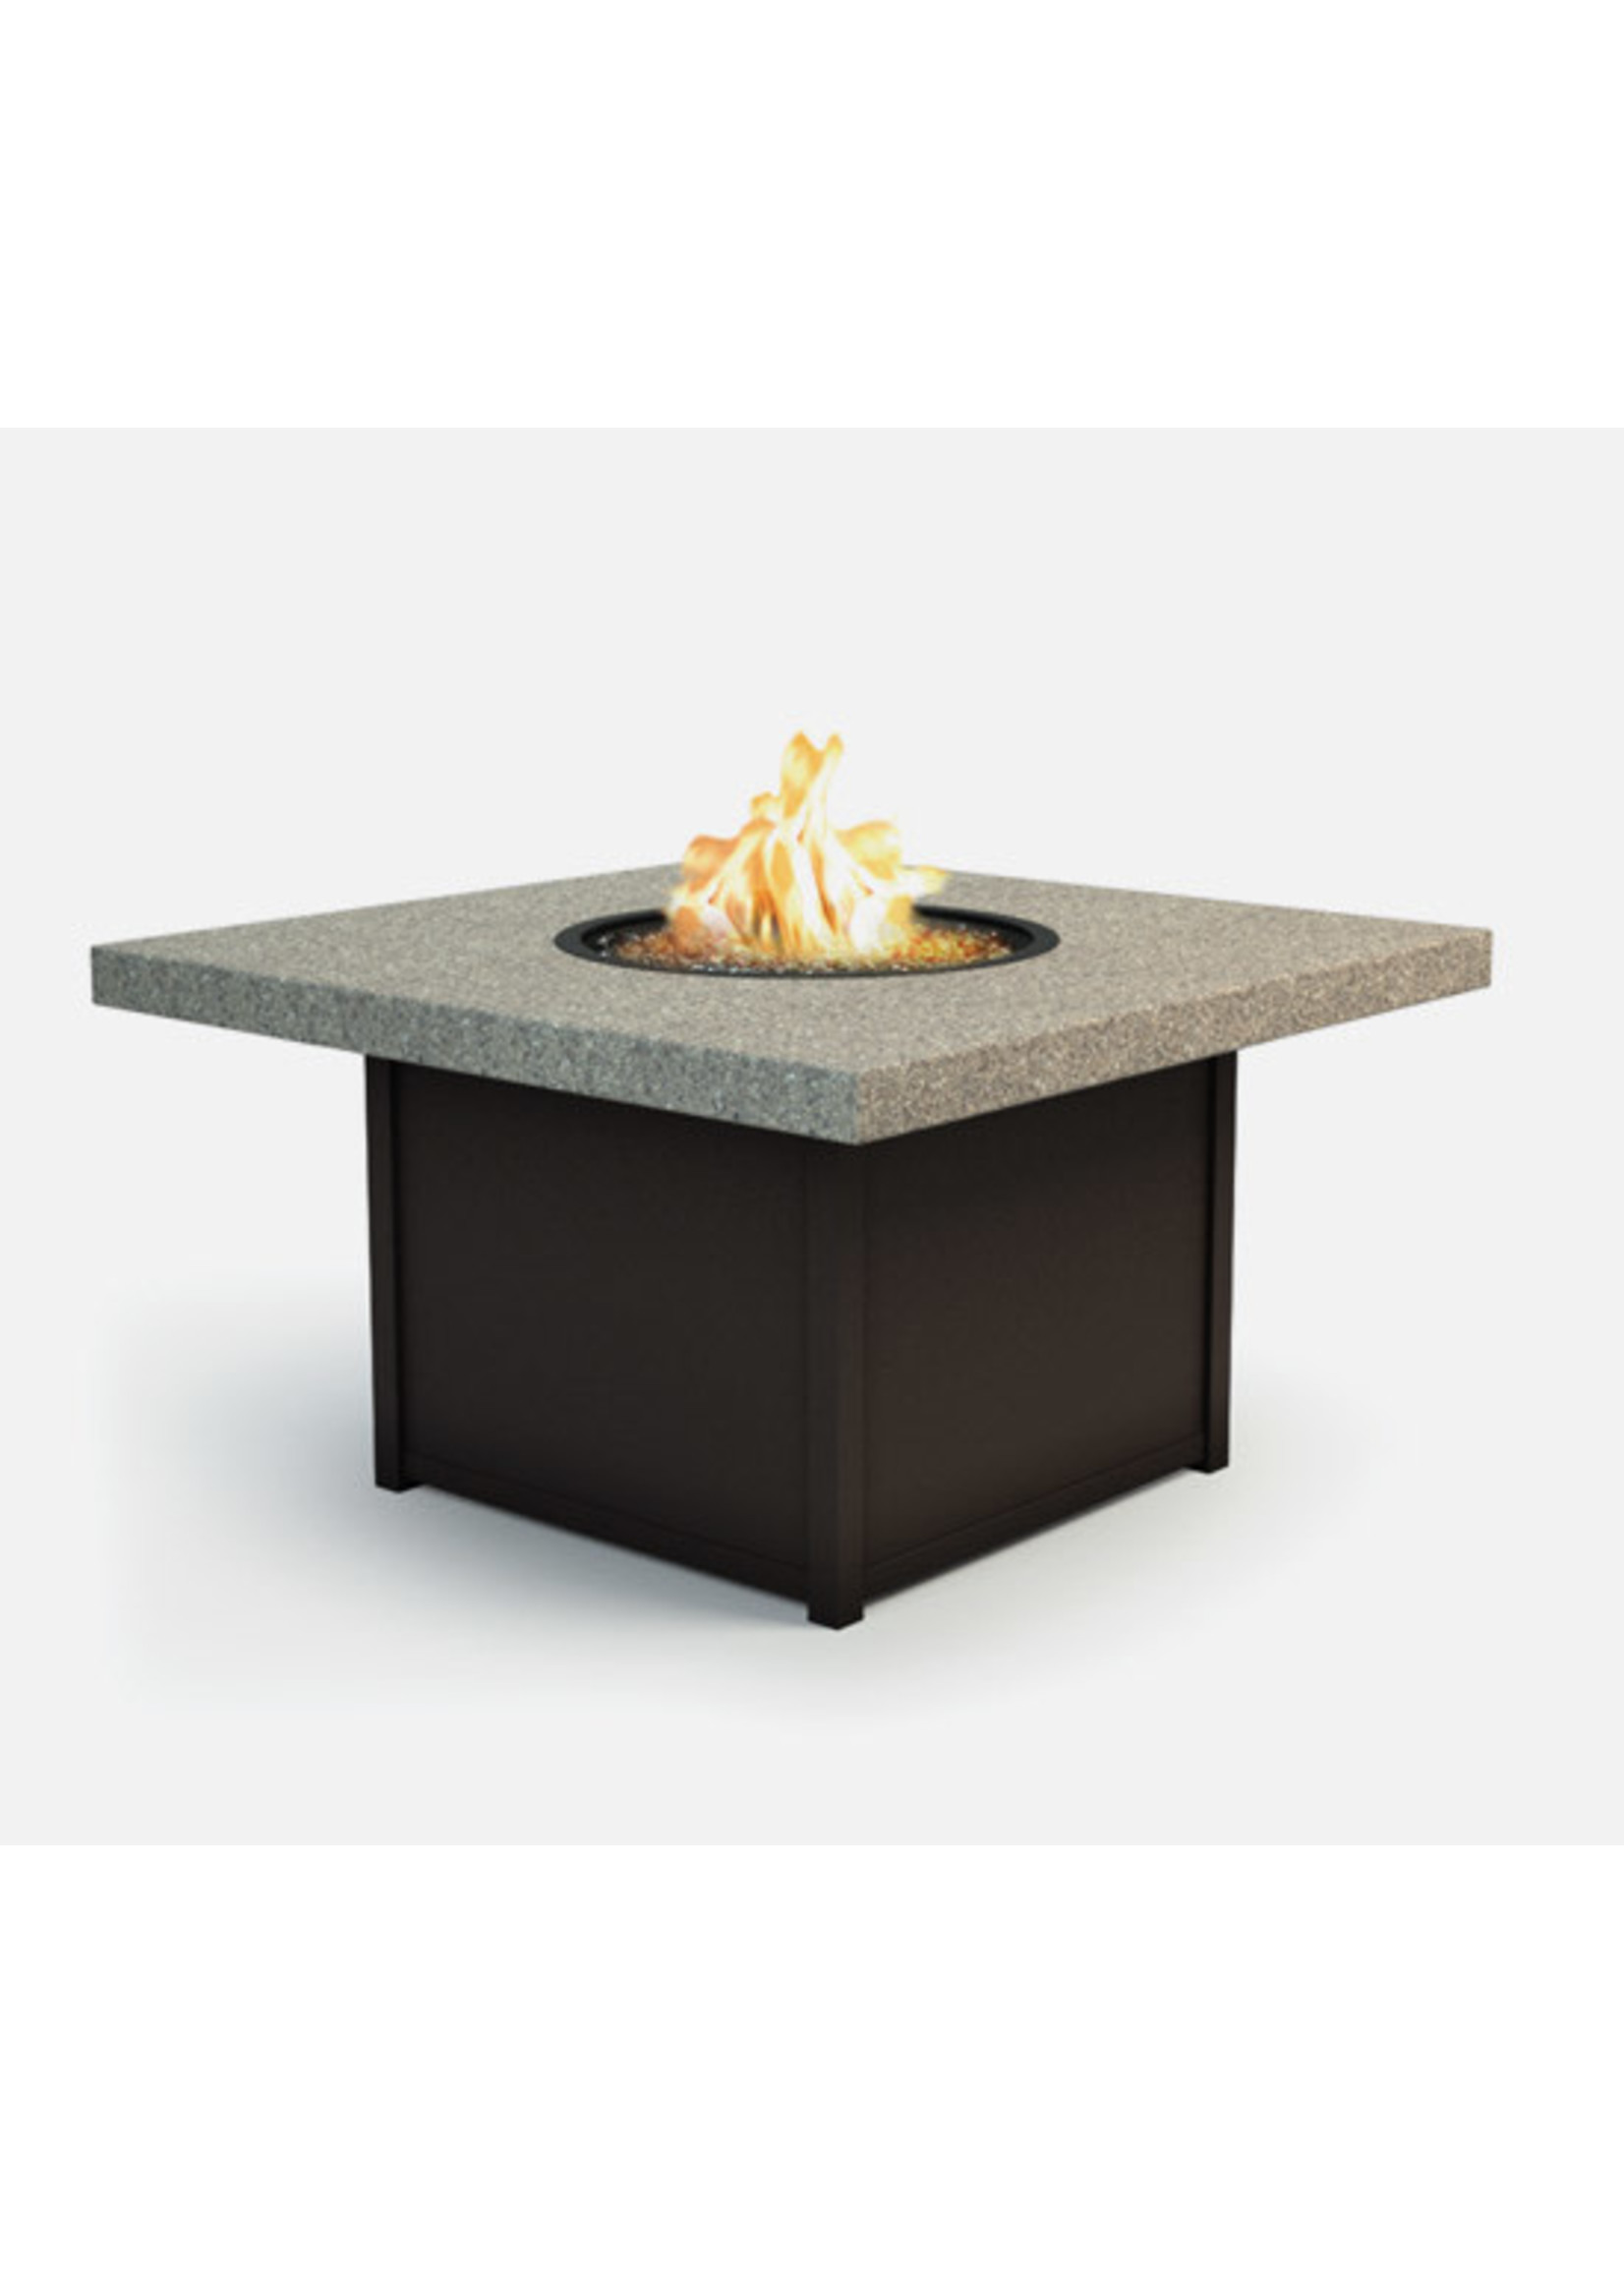 HOMECREST STONEGATE 42" SQUARE CHAT FIRE TABLE